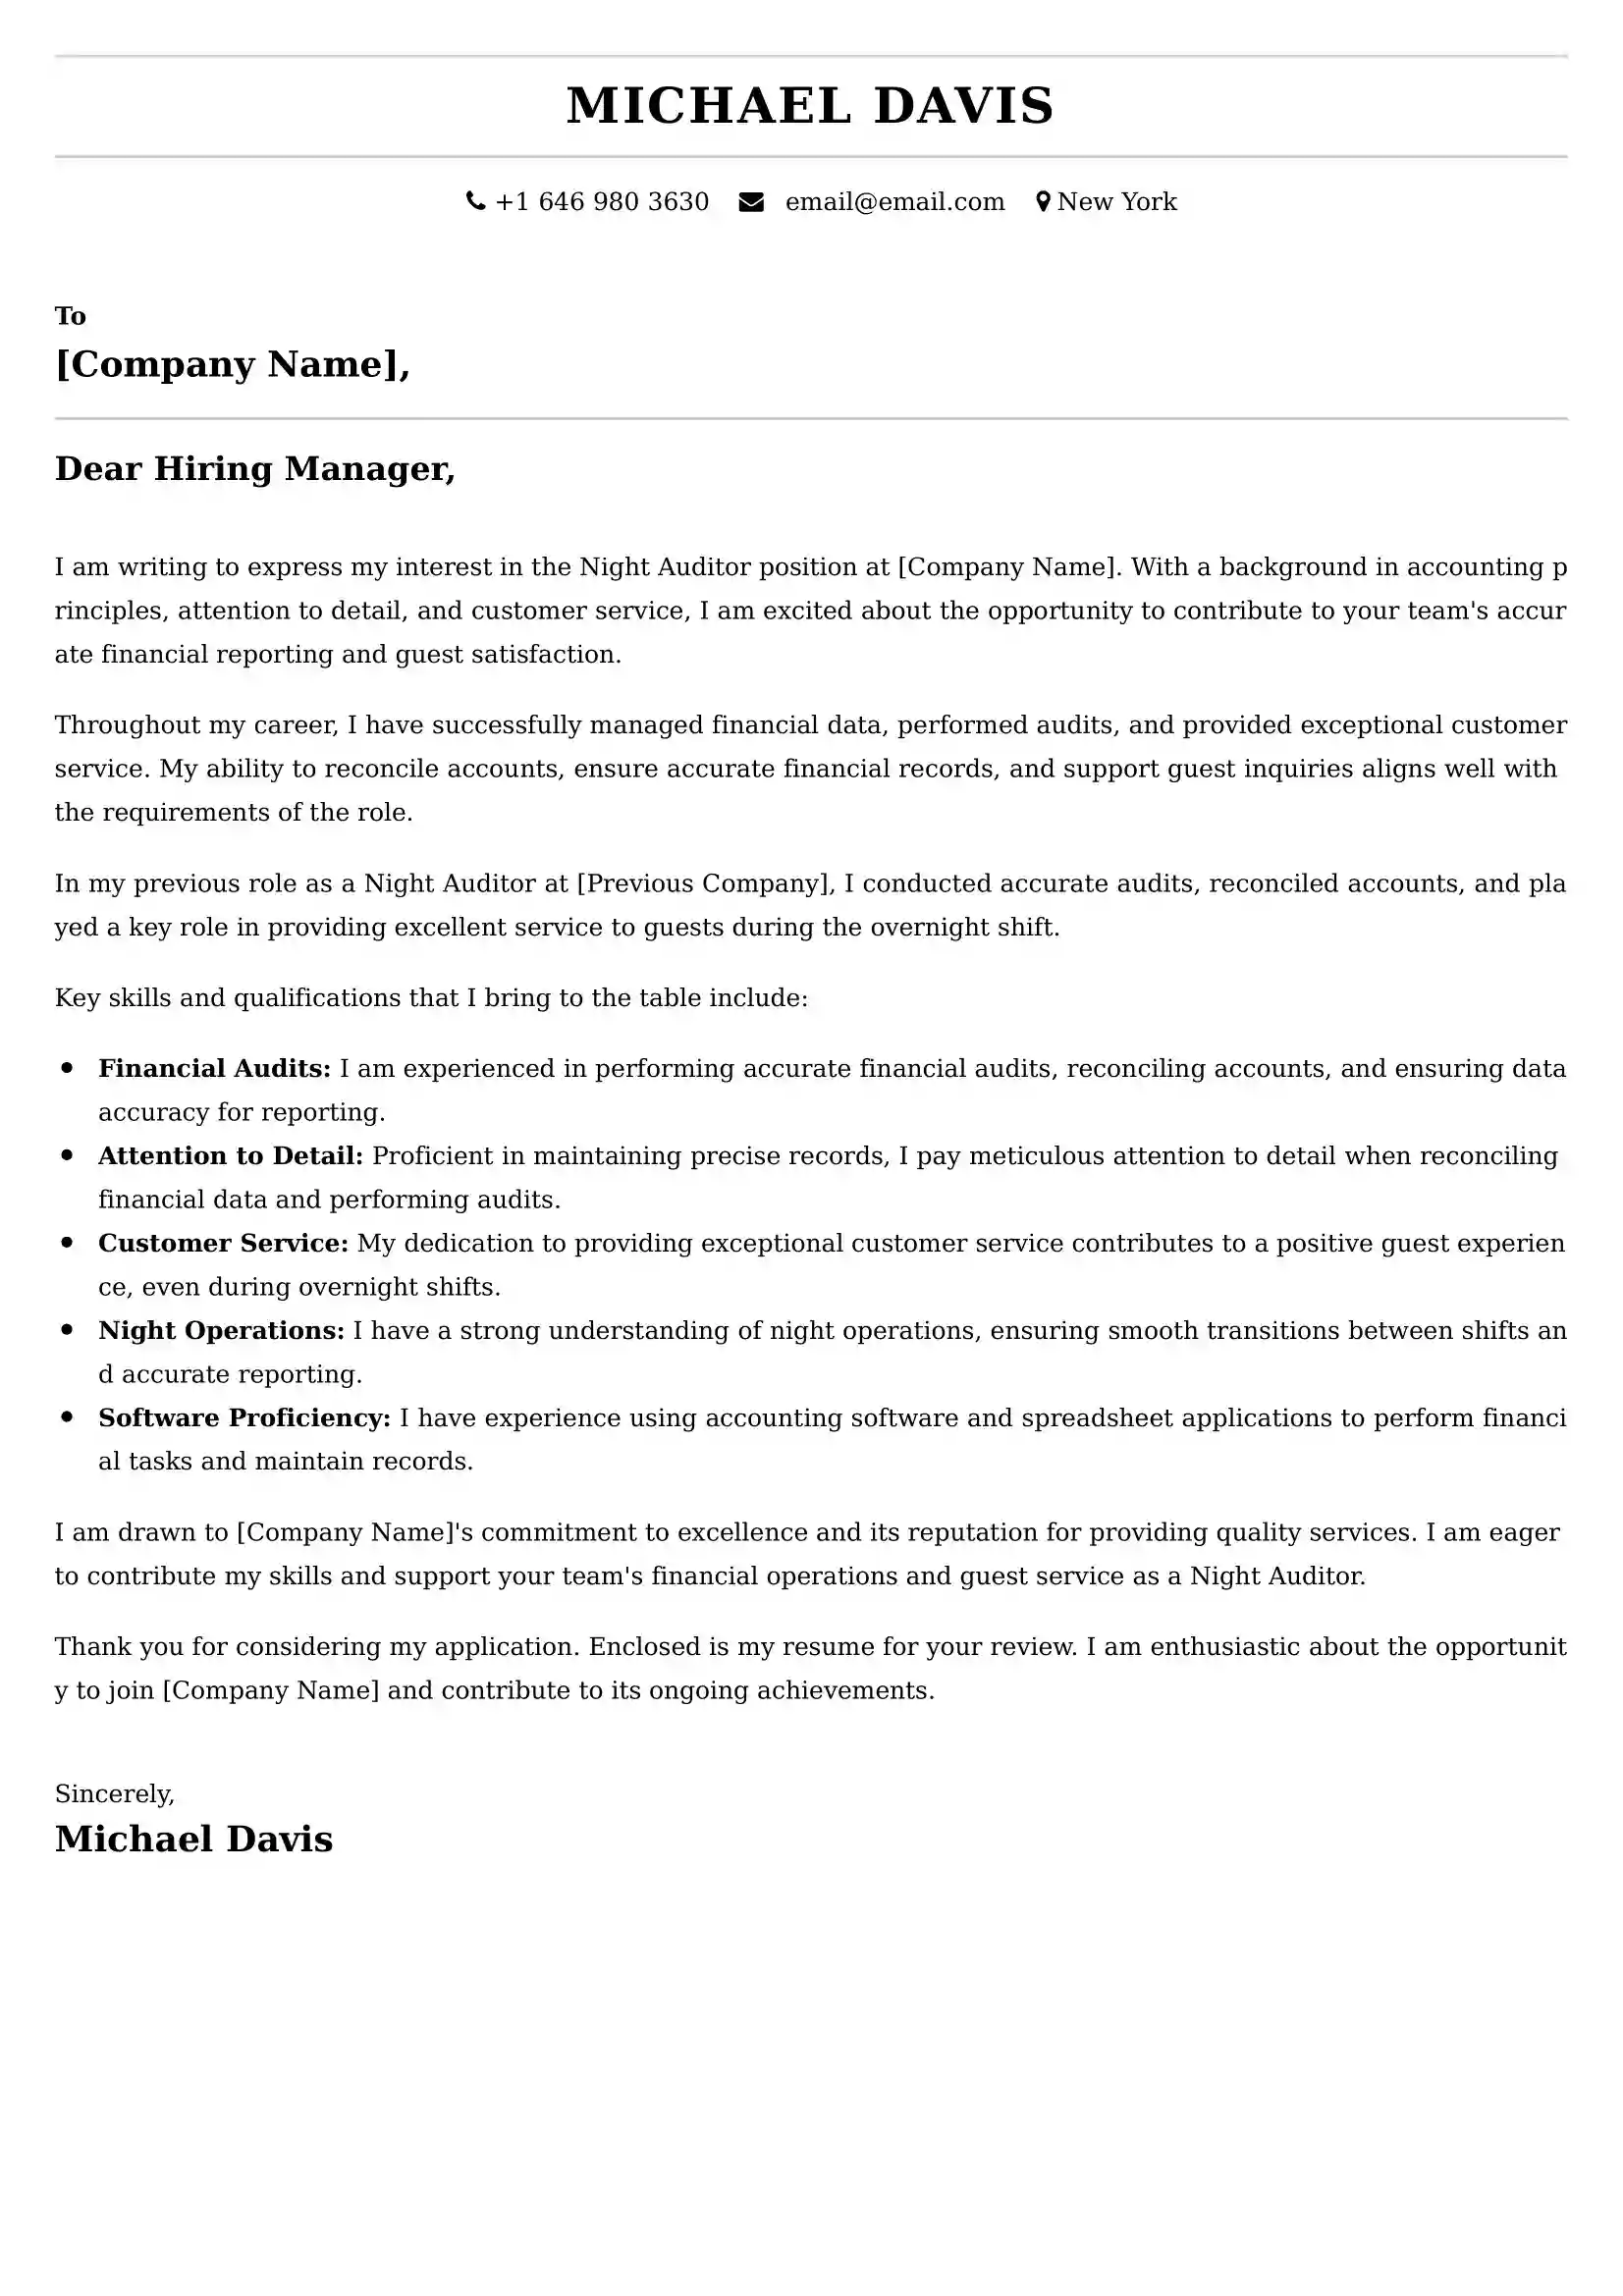 Night Auditor Cover Letter Examples - Latest UK Format